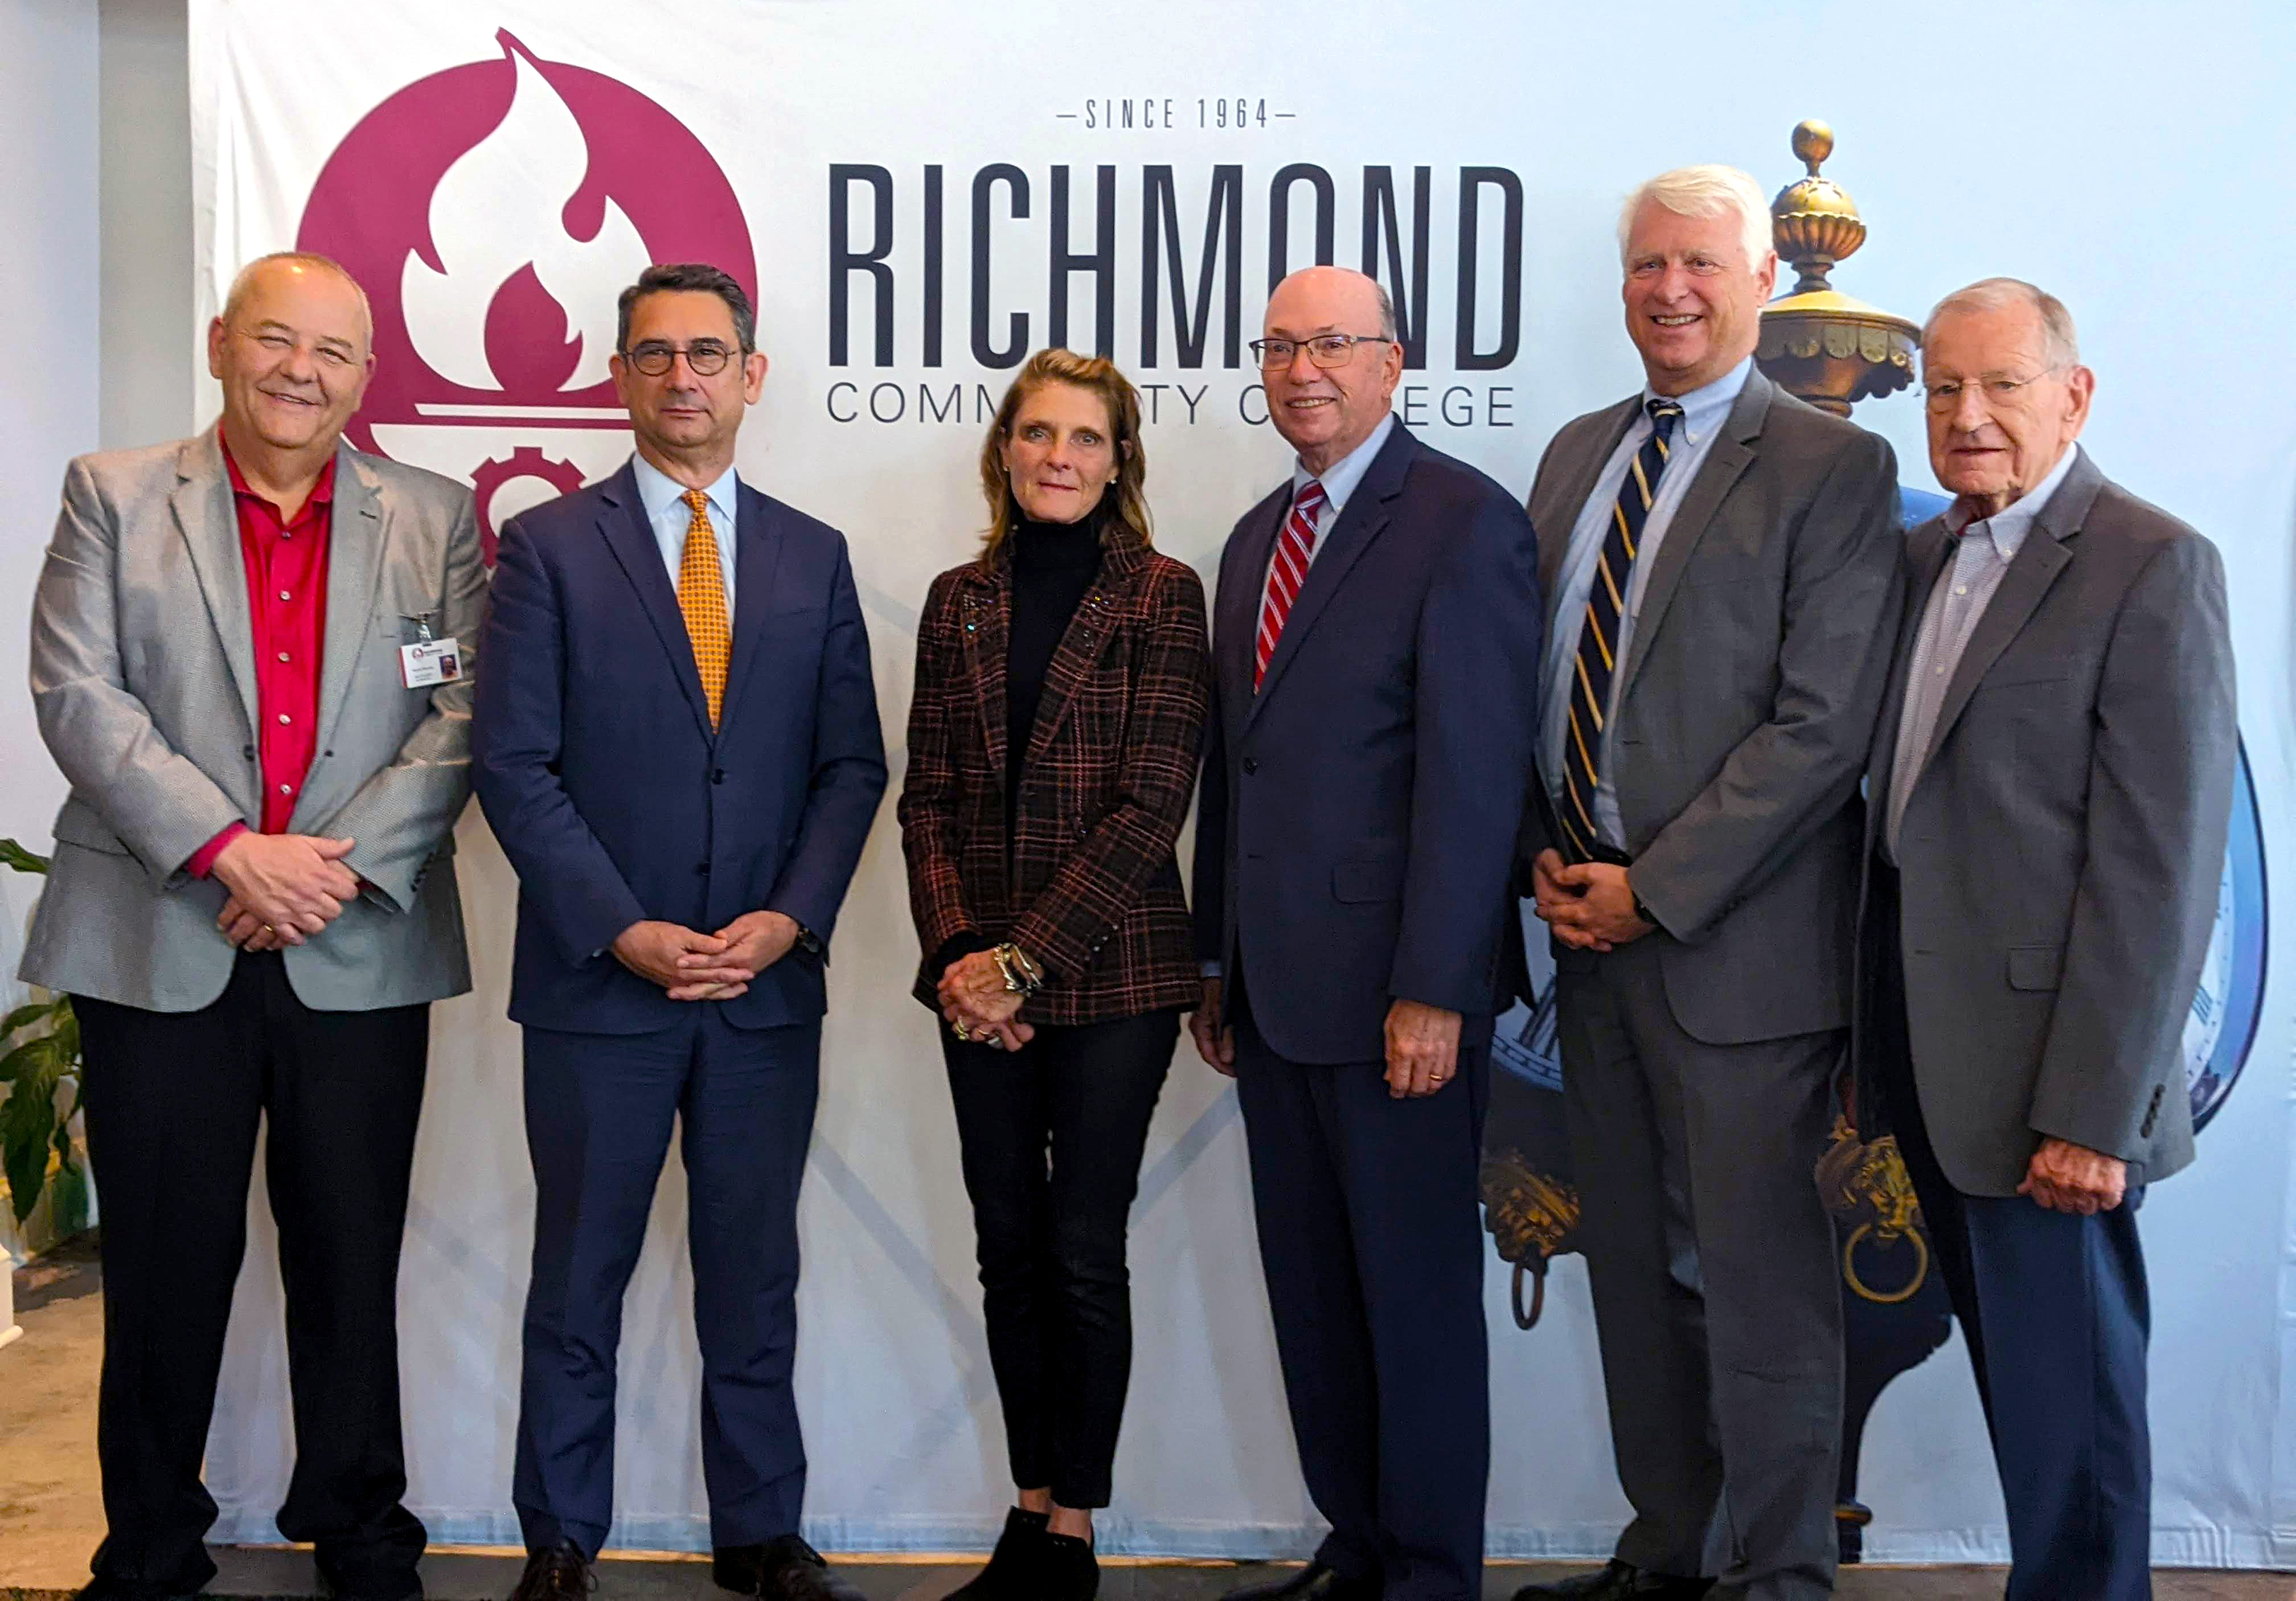 A group of leaders from Wingate University and RichmondCC pose for a photo.